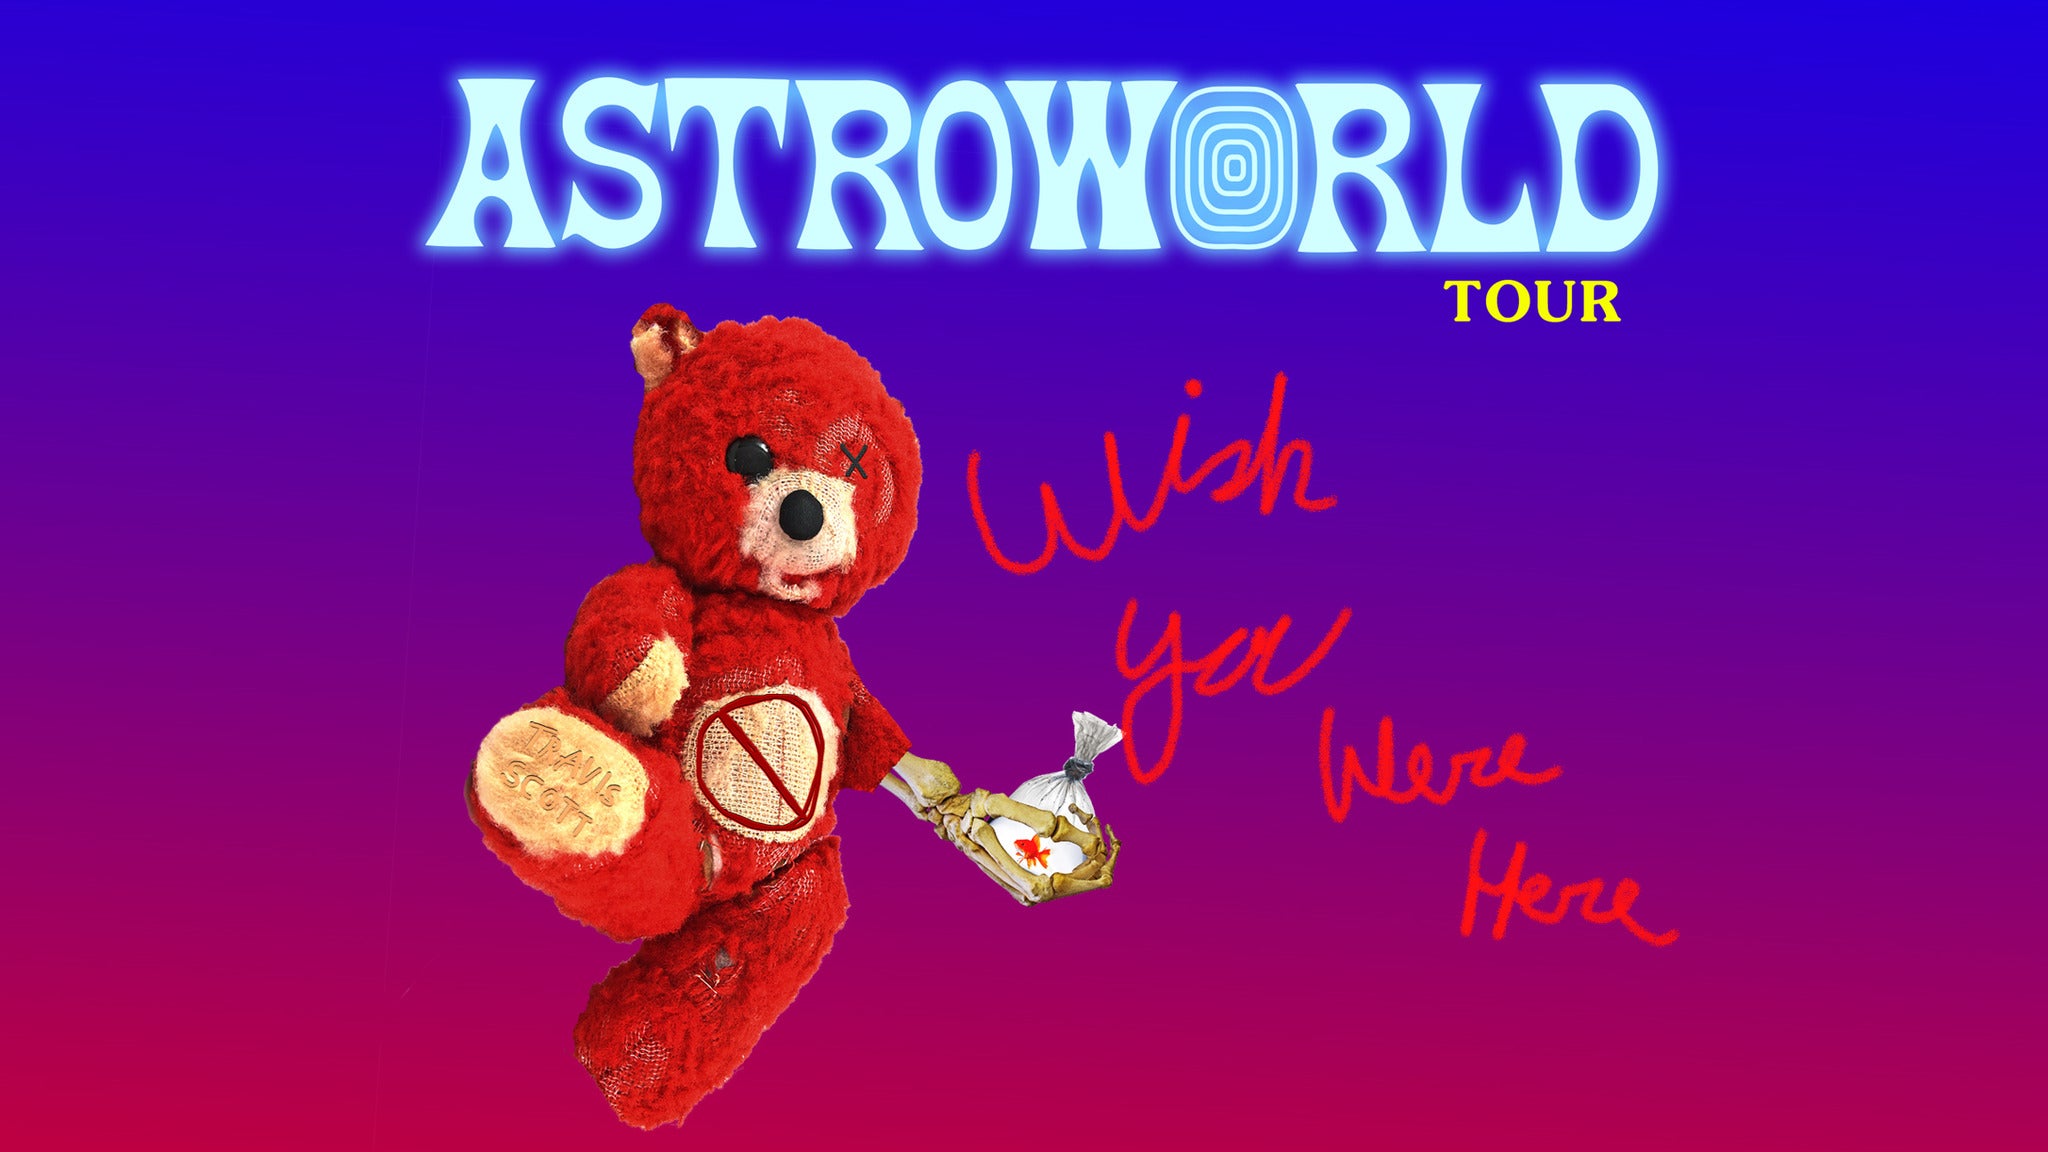 Travis Scott: Astroworld - Wish You Were Here Tour 2 in University Park promo photo for BJC Insiders presale offer code